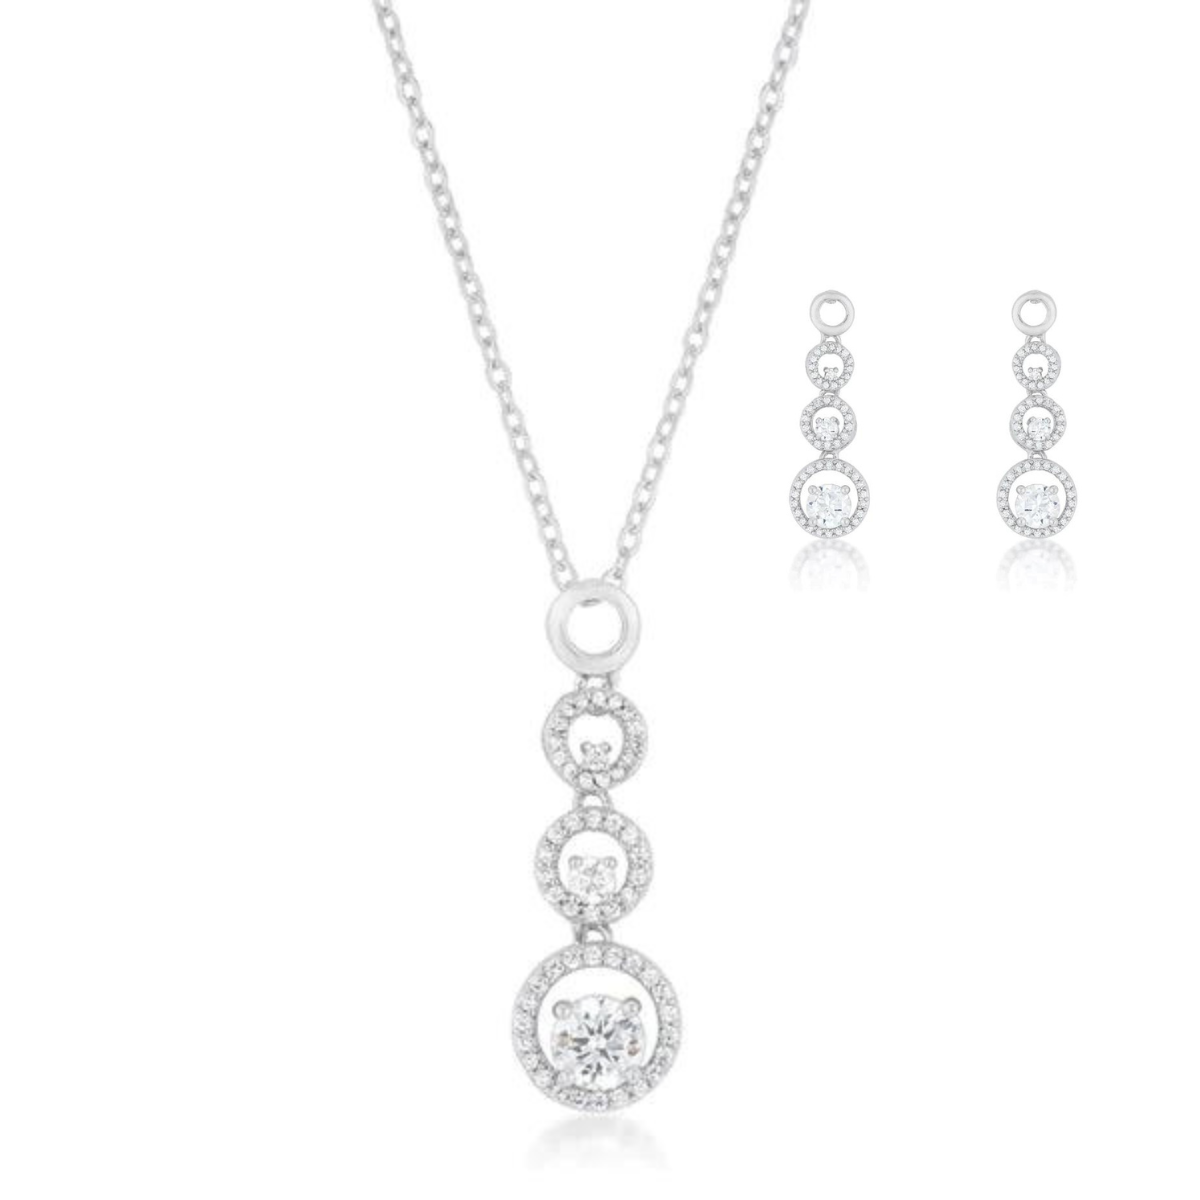 Sparkly Set Multi Hoop Pendant Necklace and Earrings Set Silver